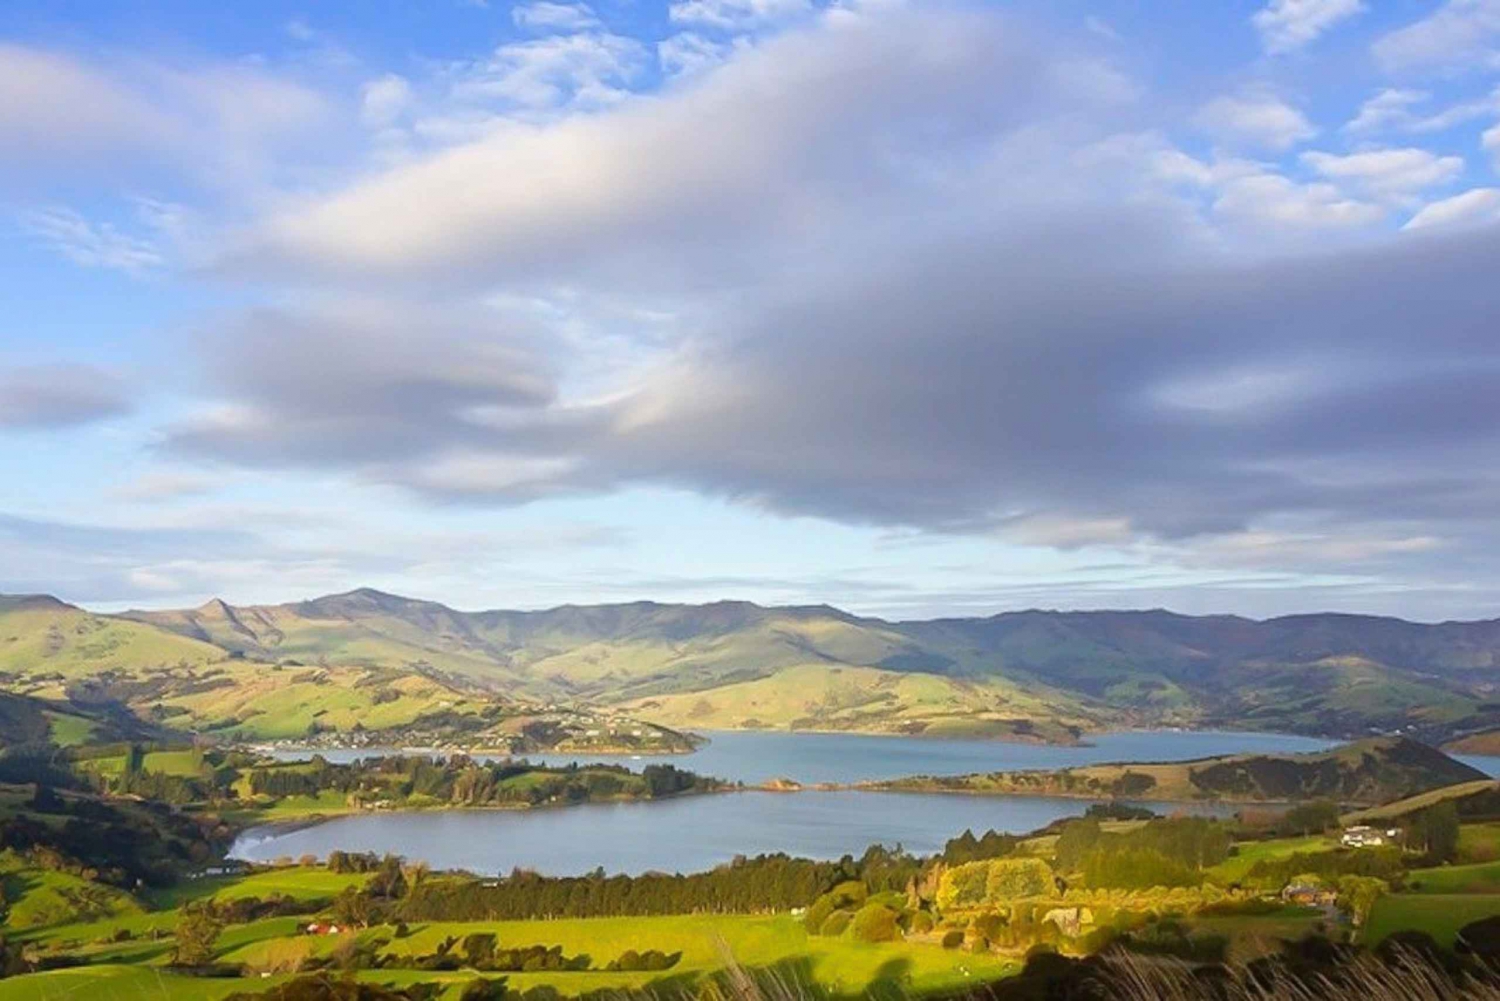 From Christchurch: Helicopter Flight to Akaroa